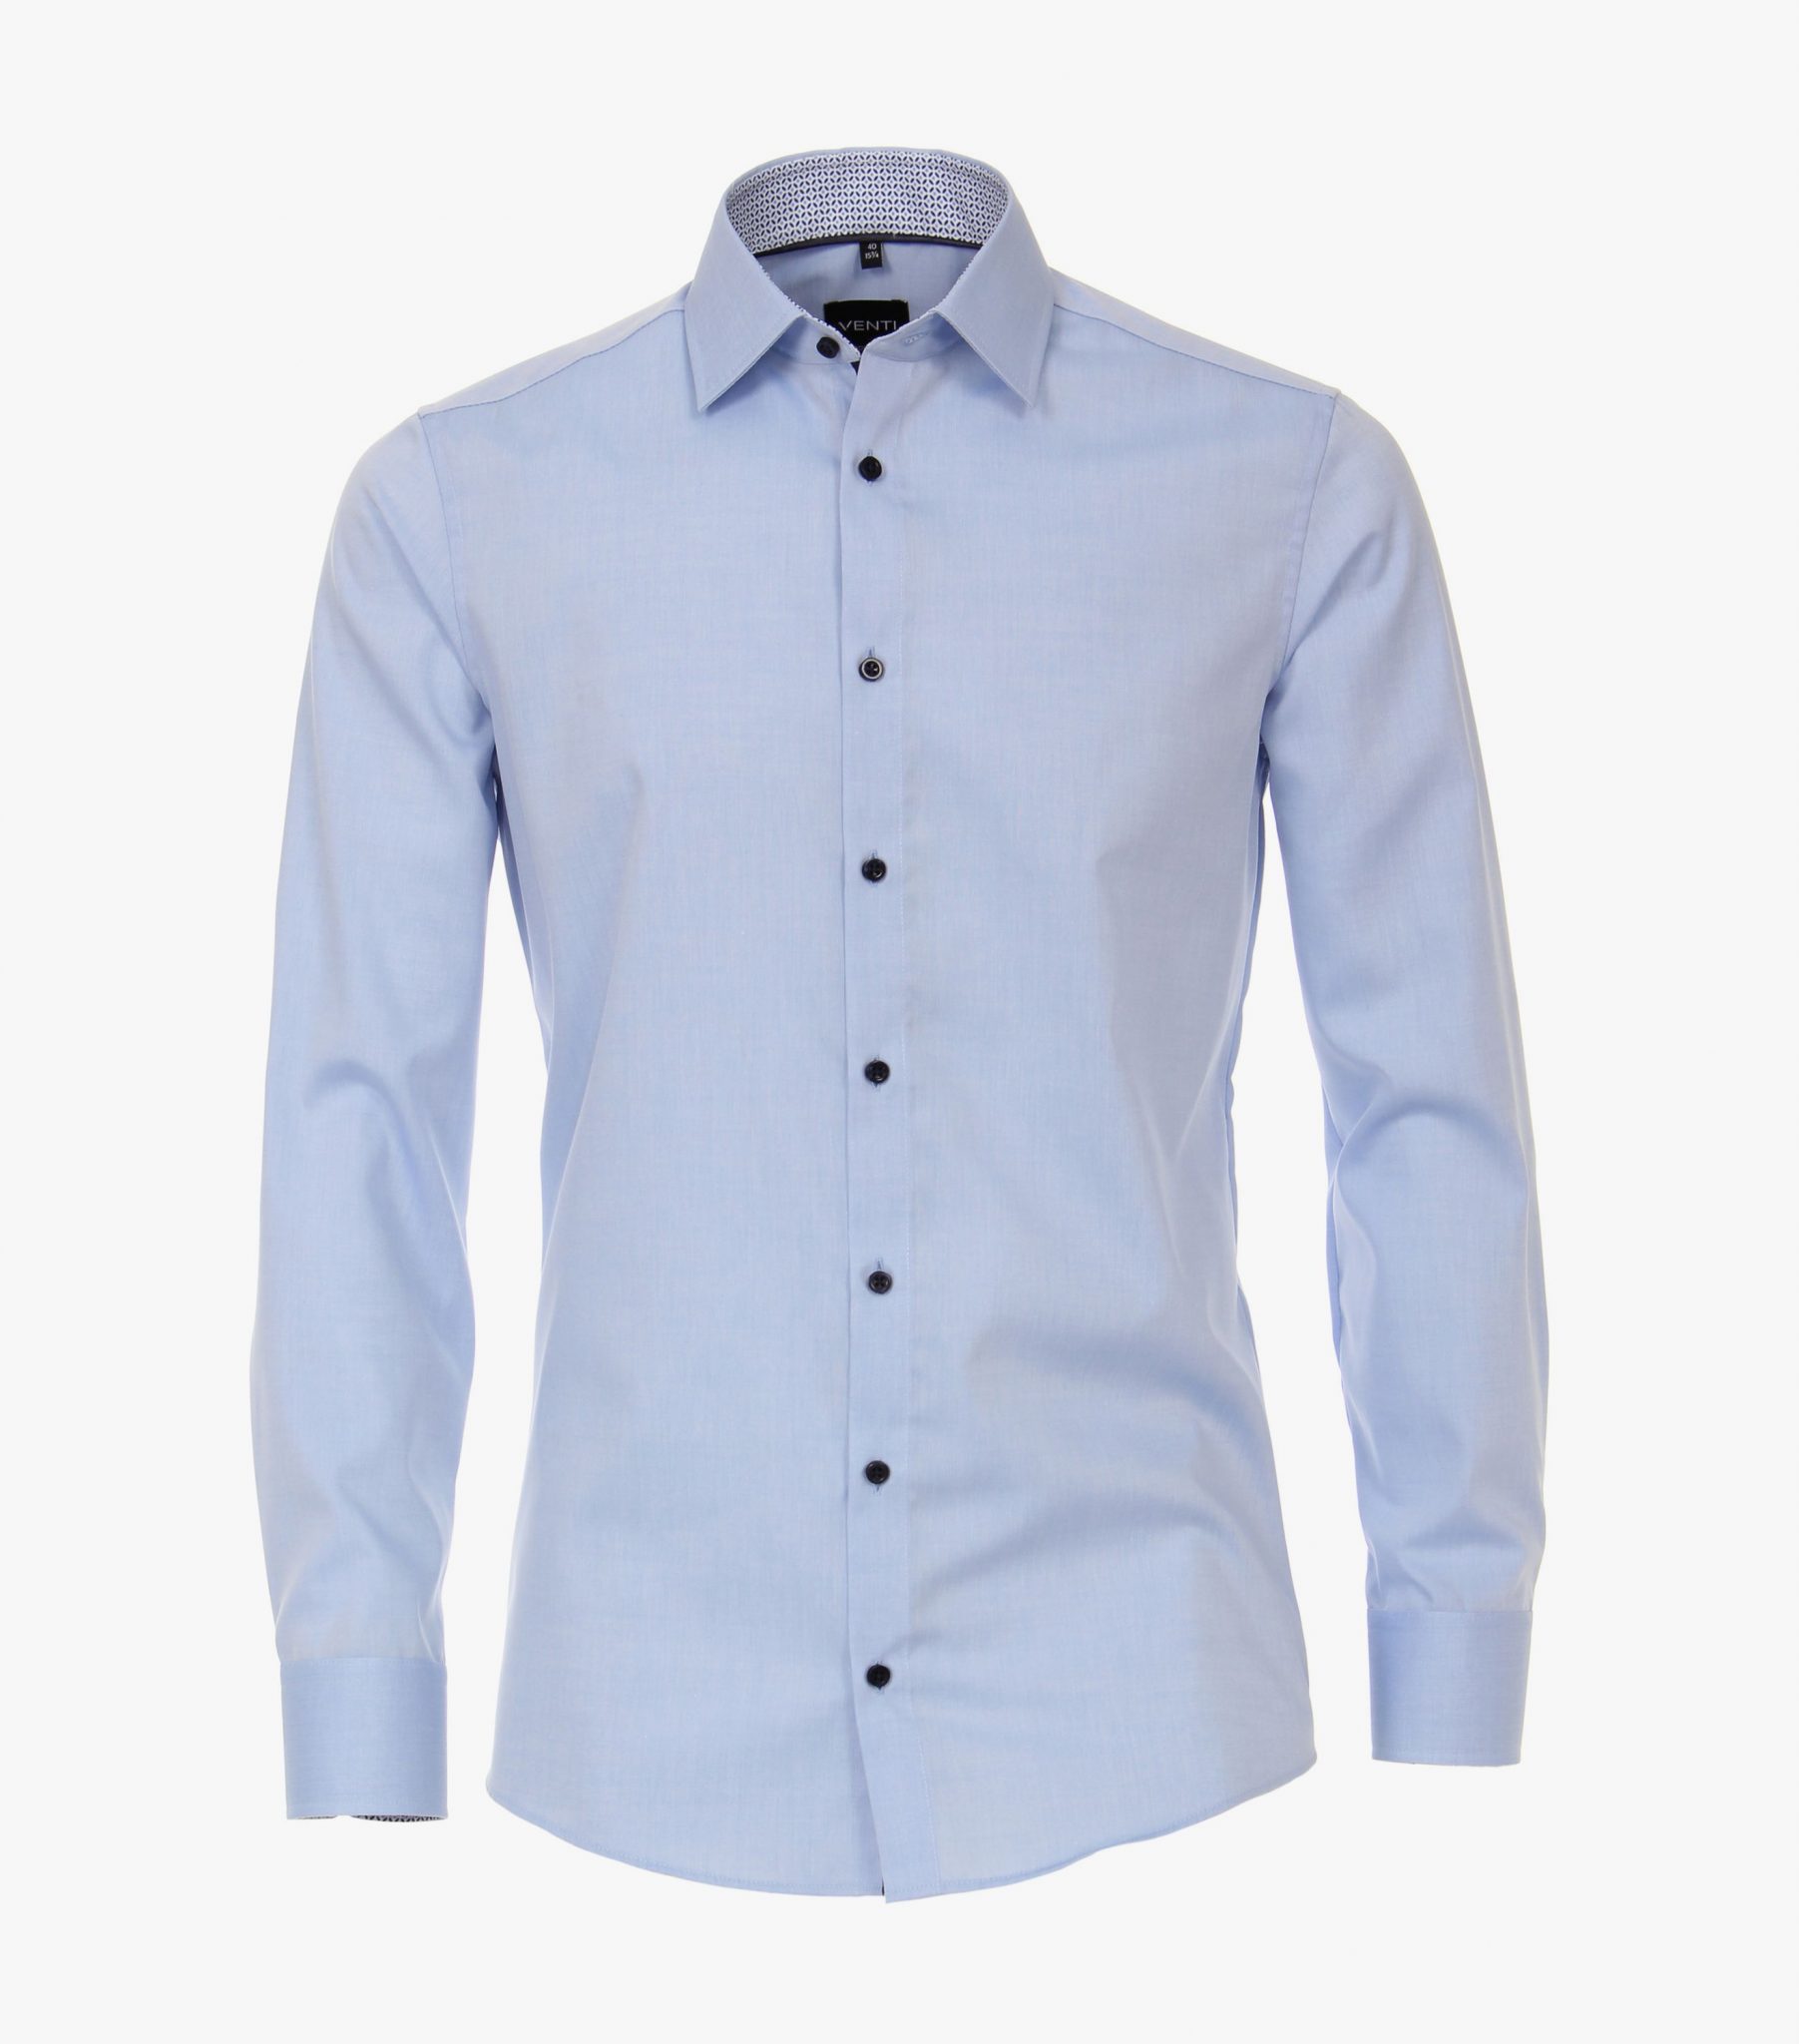 Venti Chemise Business Homme